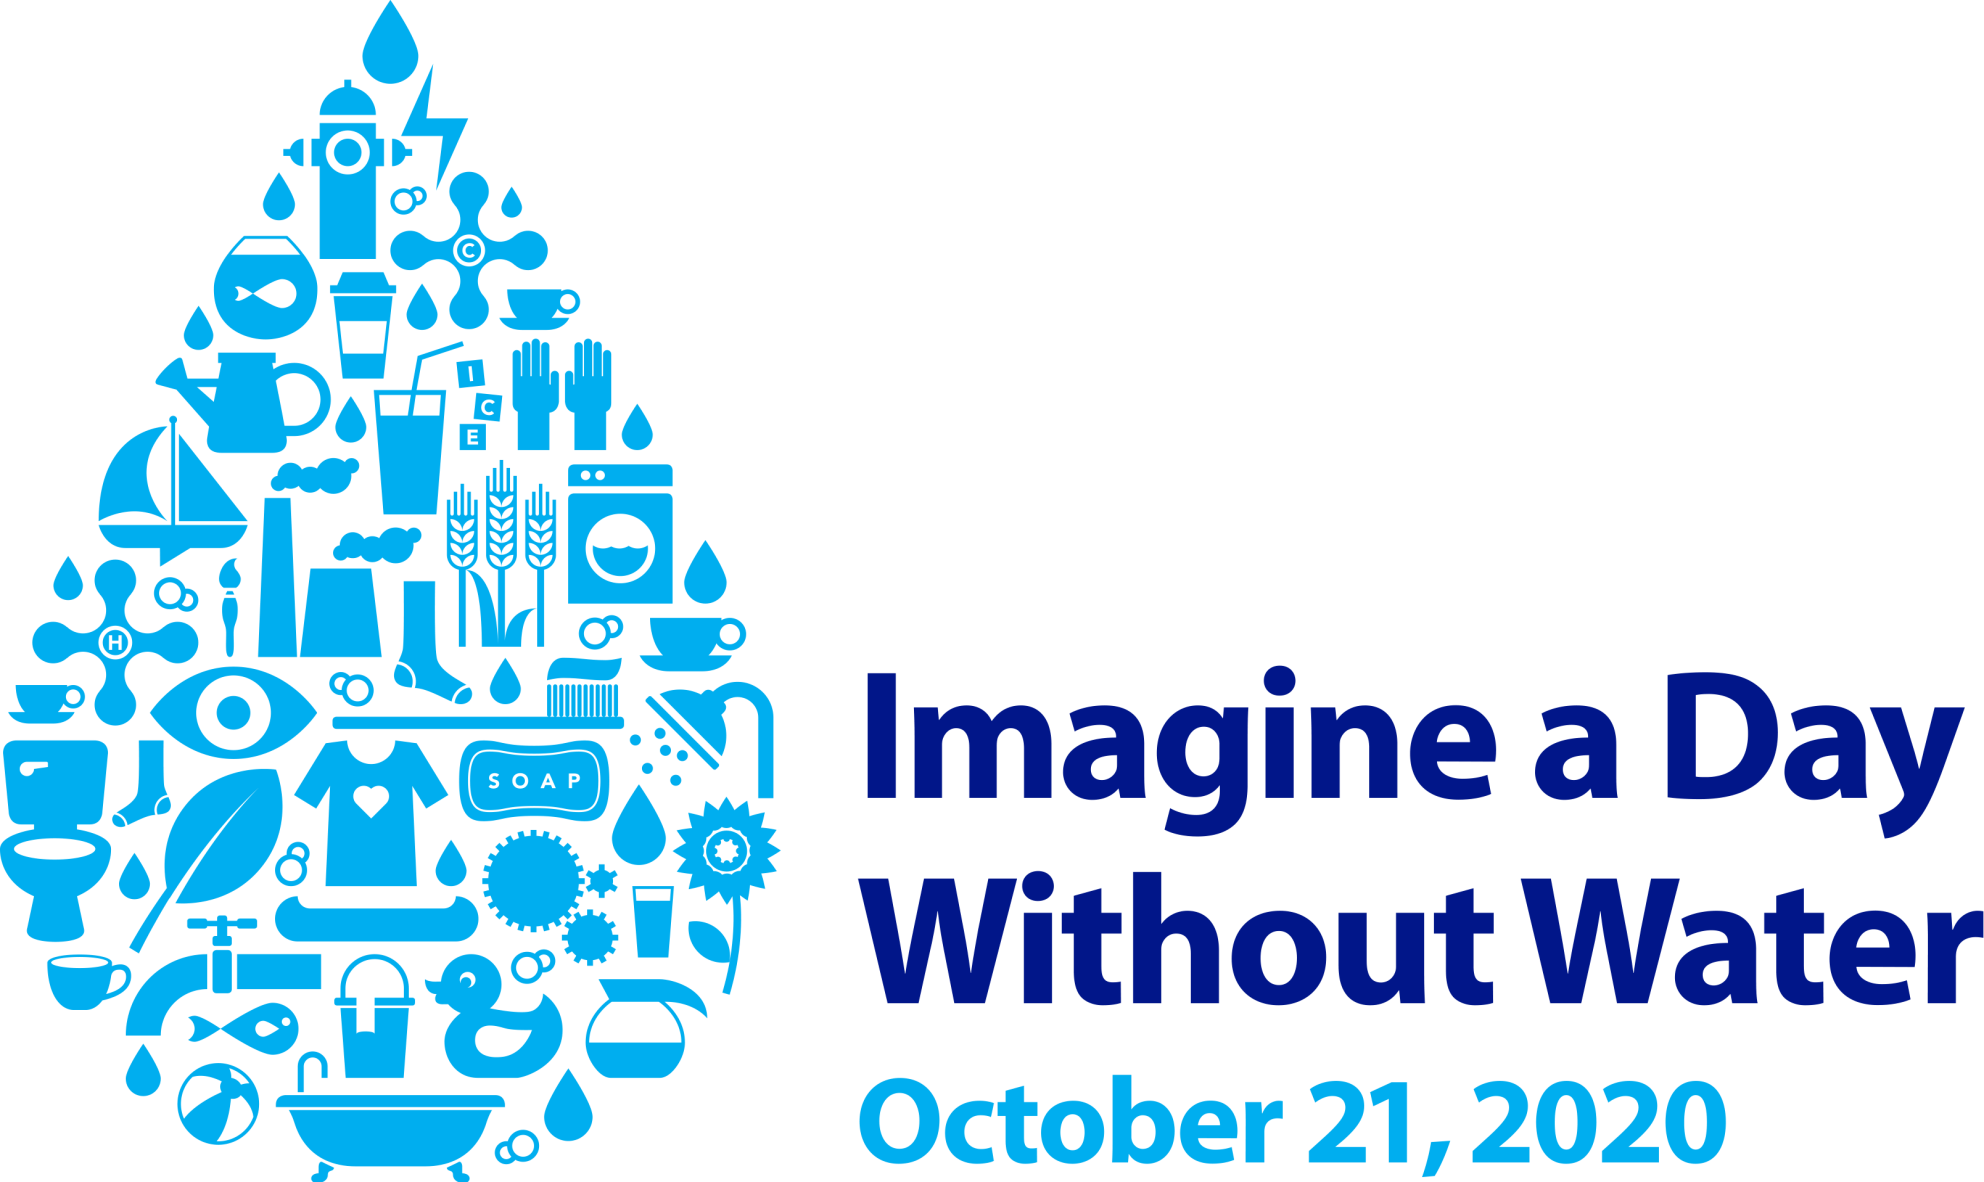 Imagine a Day Without Water - Oct 21, 2020